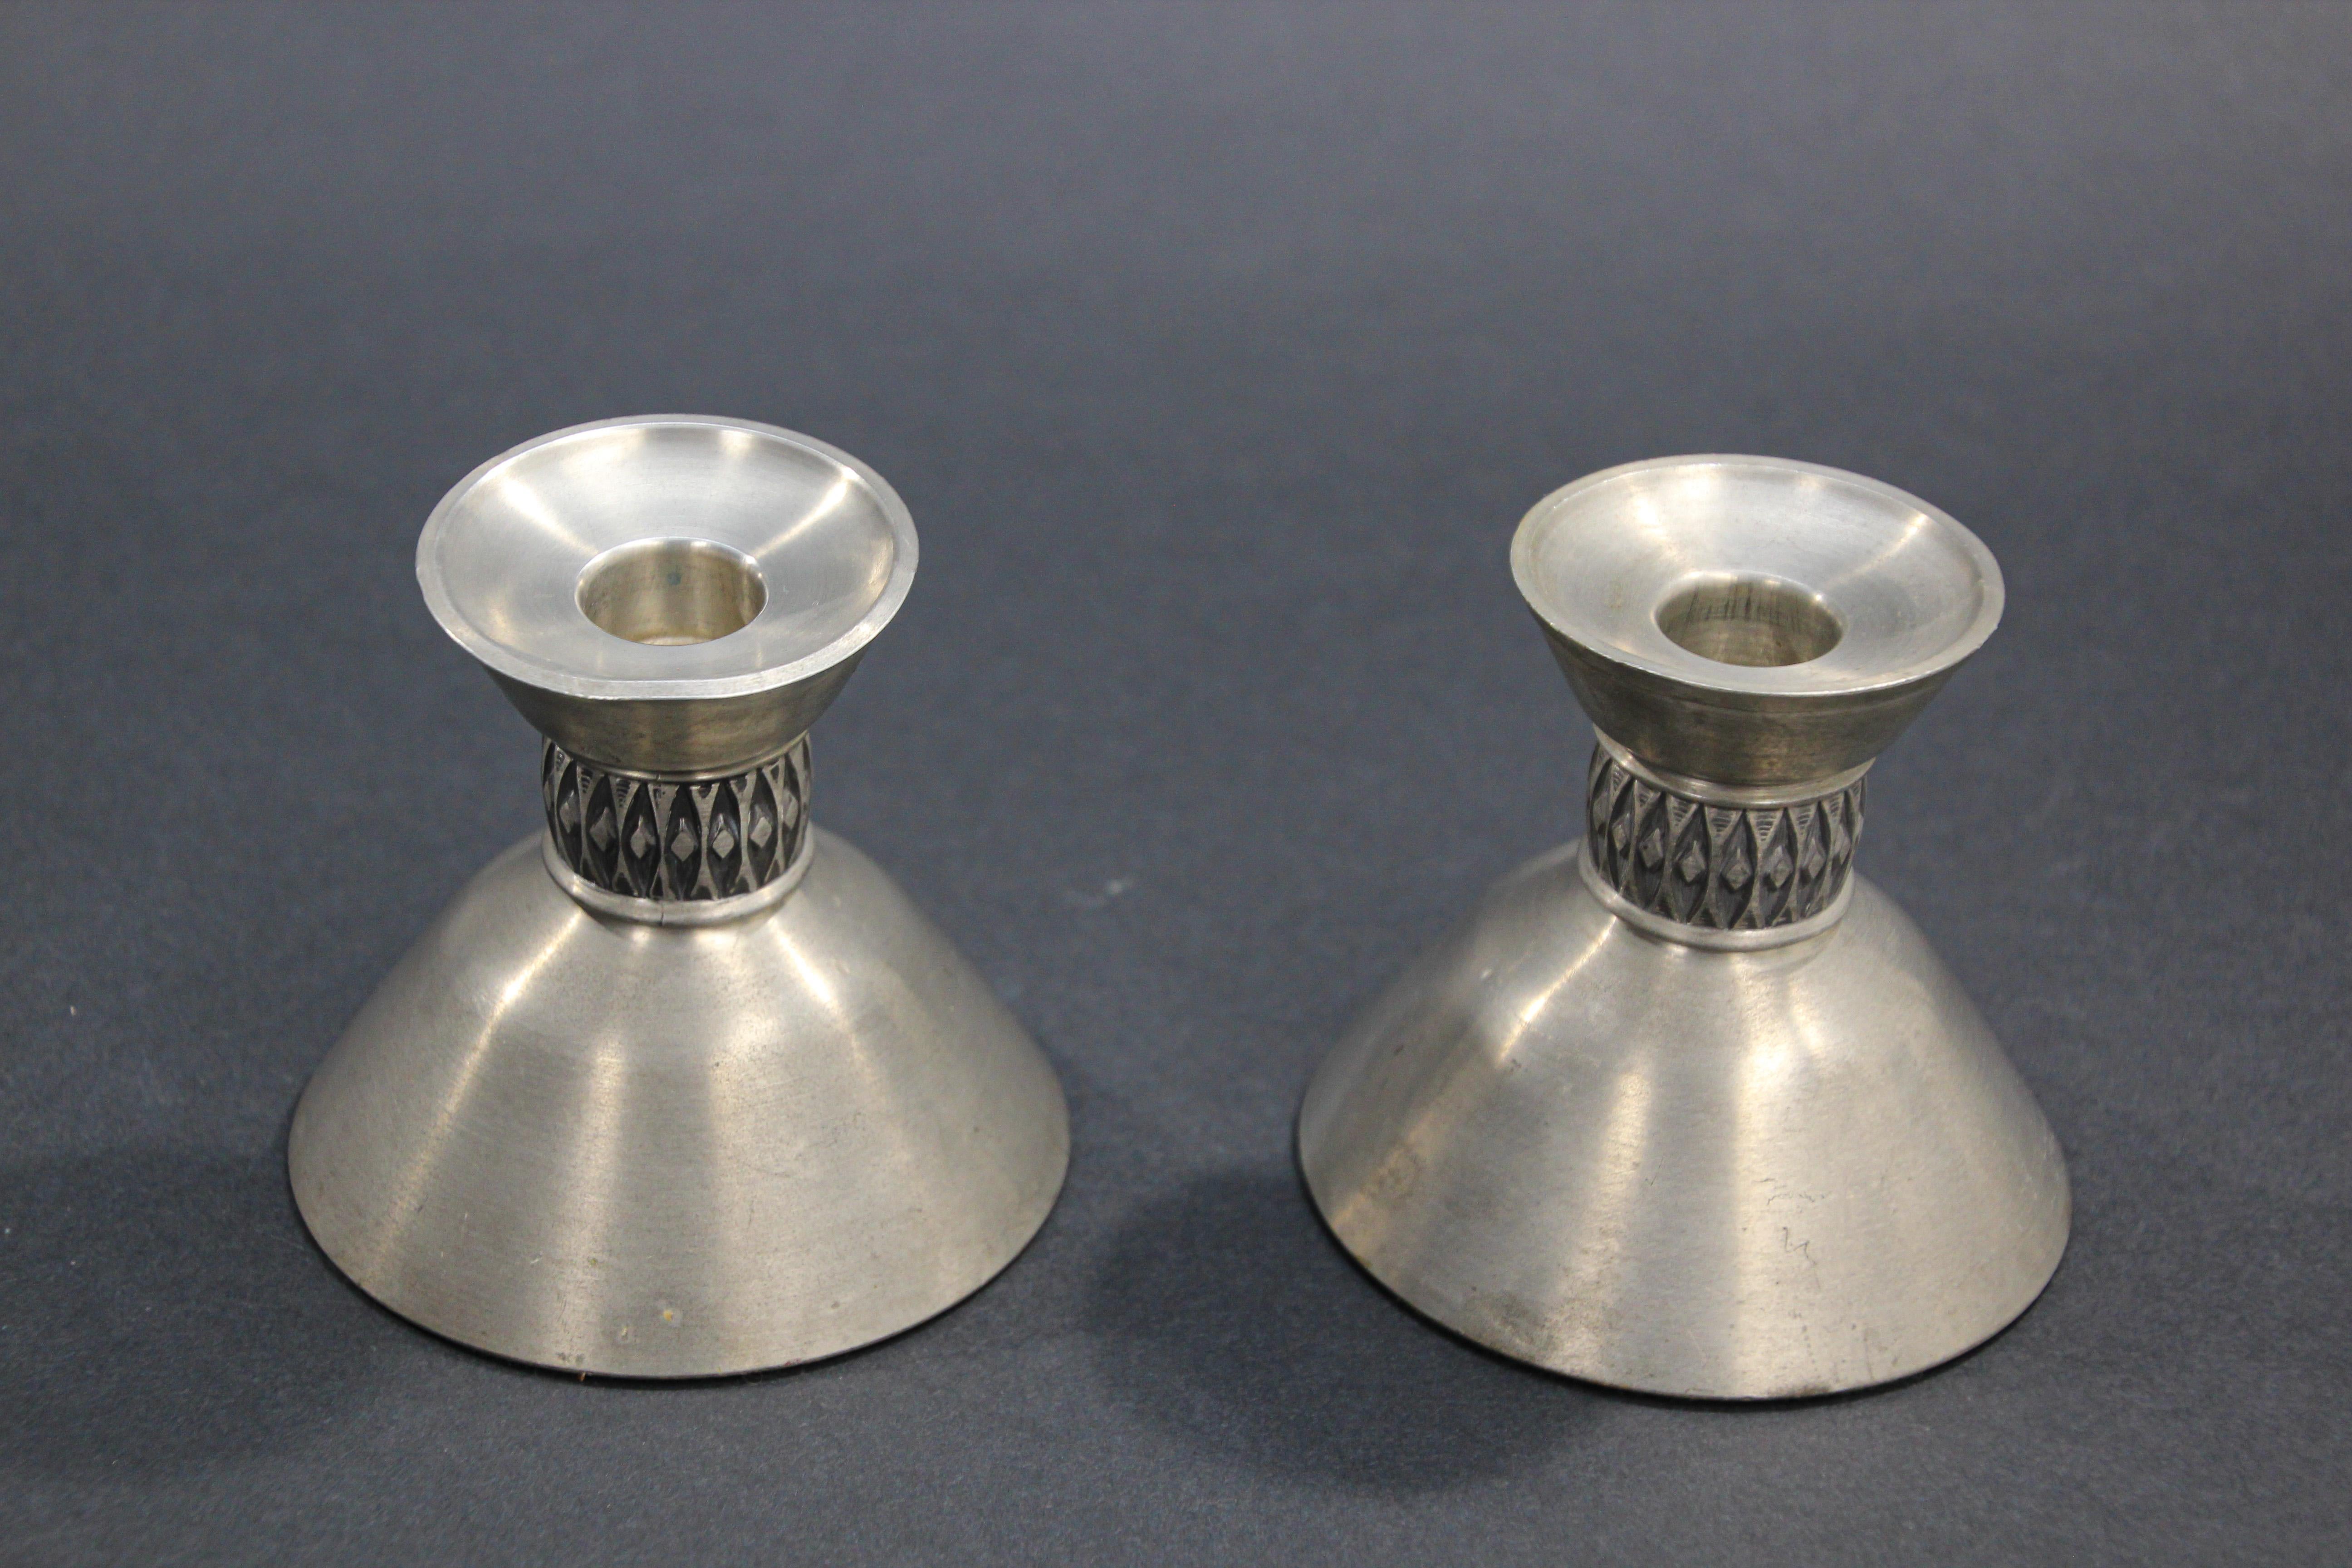 Midcentury handcrafted pair of Pewter candle holders by Mastad Norway Model 101, 
Midcentury 1950s candlesticks are unique and are in excellent vintage condition.
Pewter Candle holders made by Mastad Pewter, Norway and signed 101 which is the